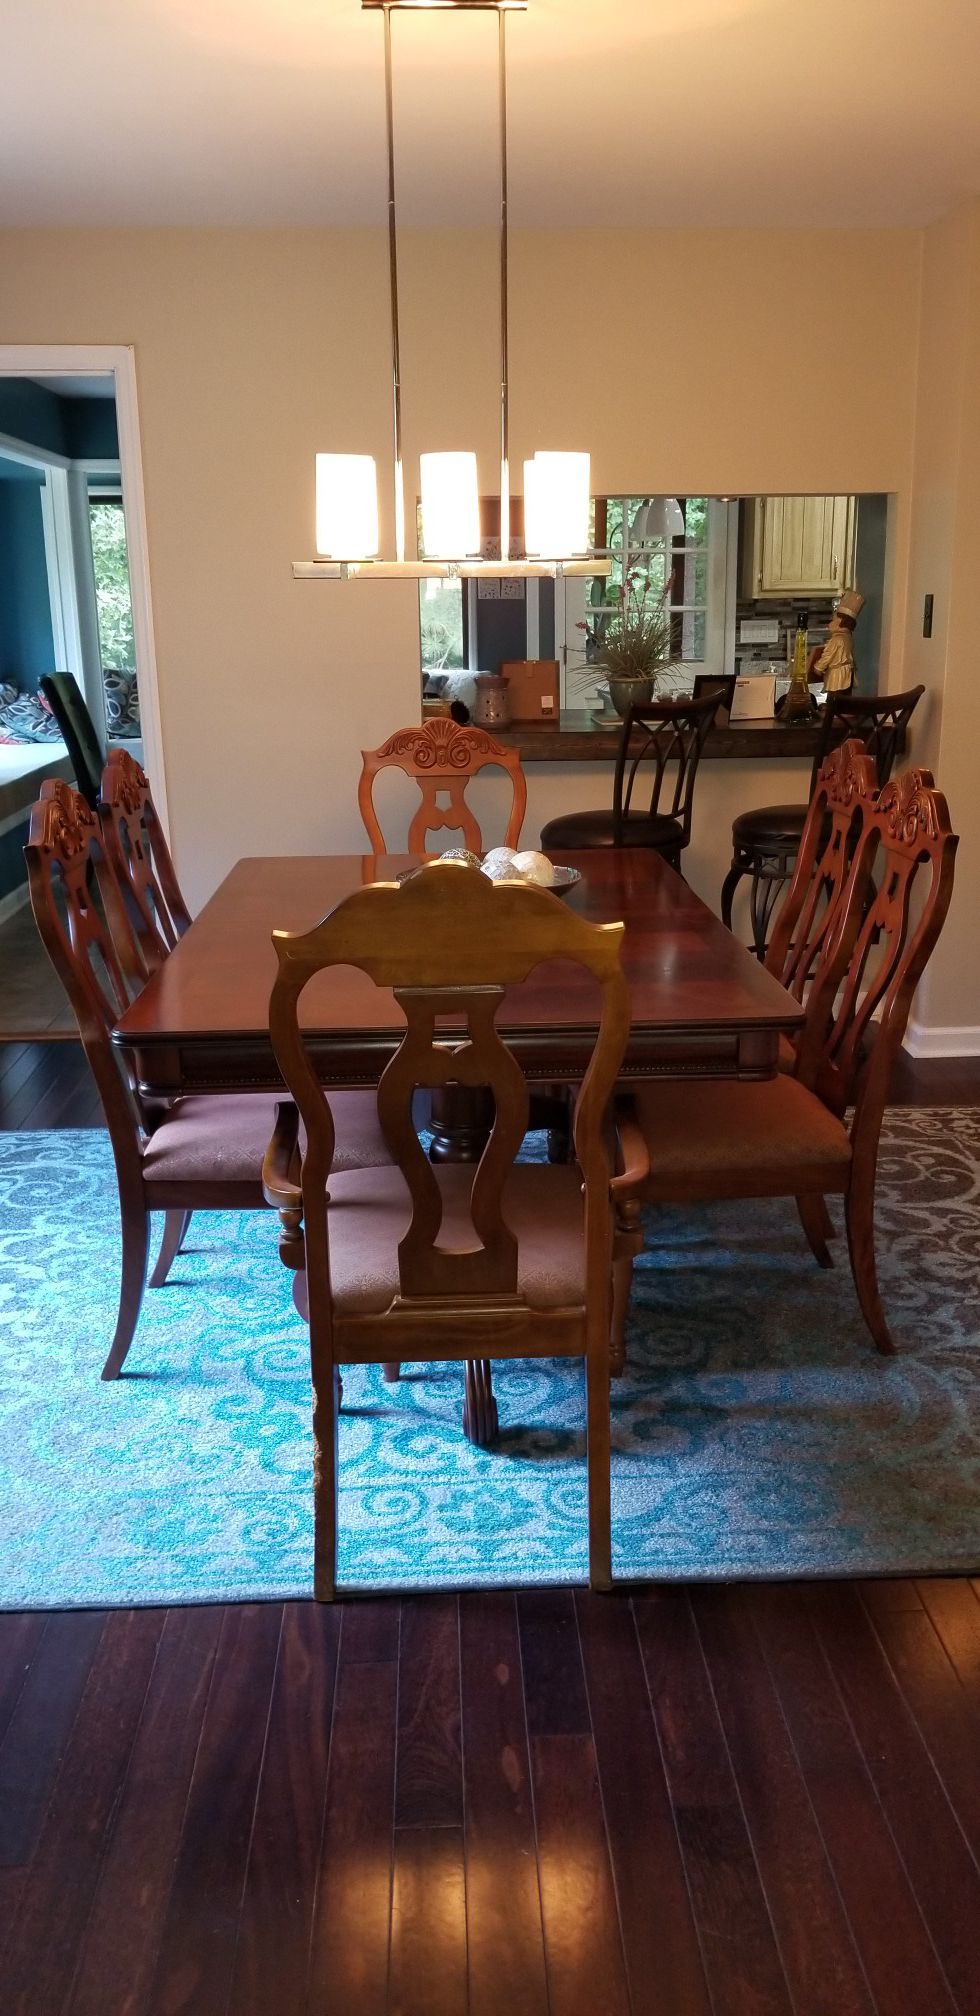 Family Dinner Thanksgiving - Cherry Dining table / 6 chairs, 2 arm chairs and 4 side chairs